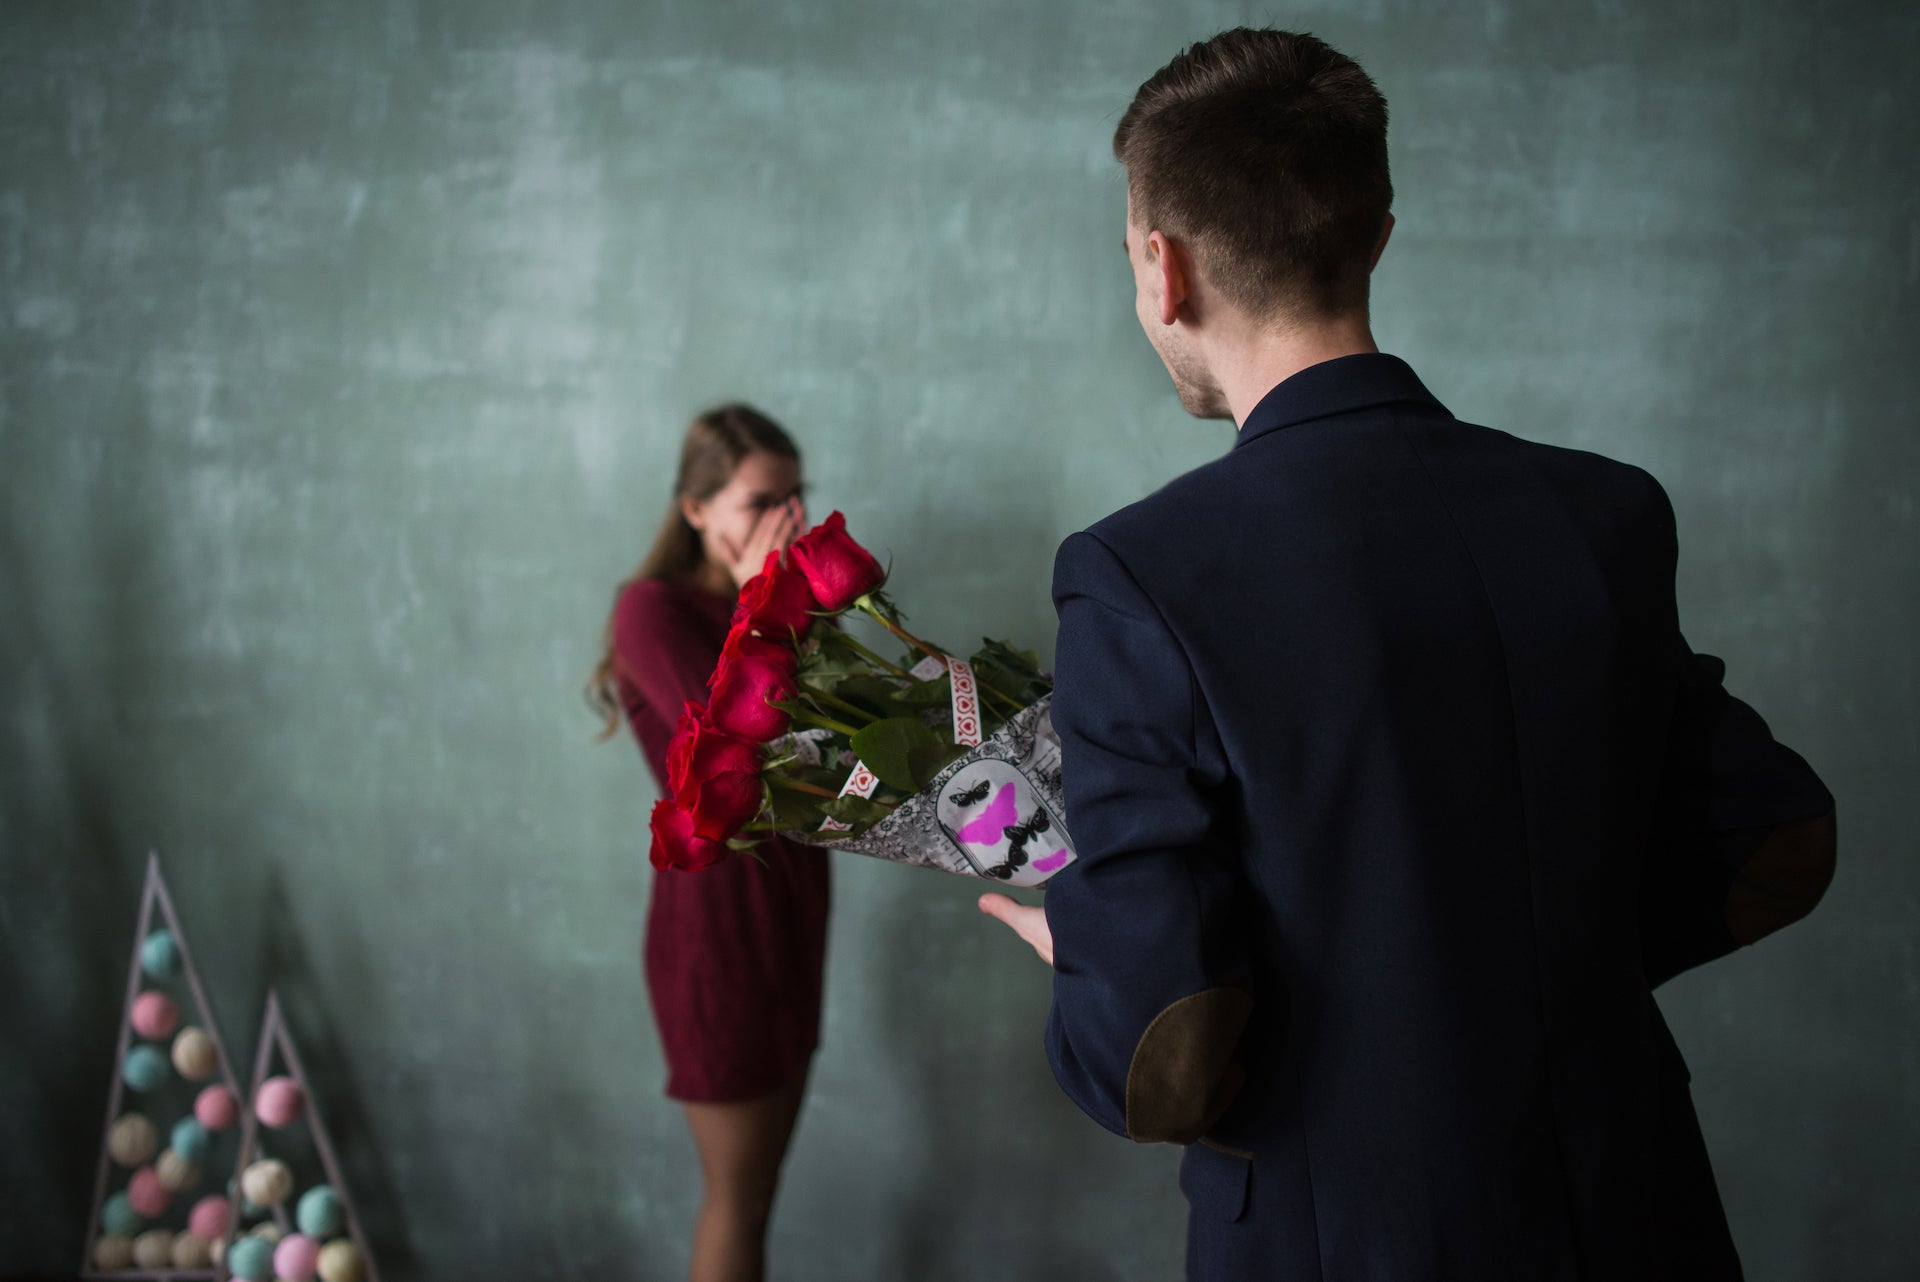 7 Captivating Ideas for Using Flowers for Wedding Proposals